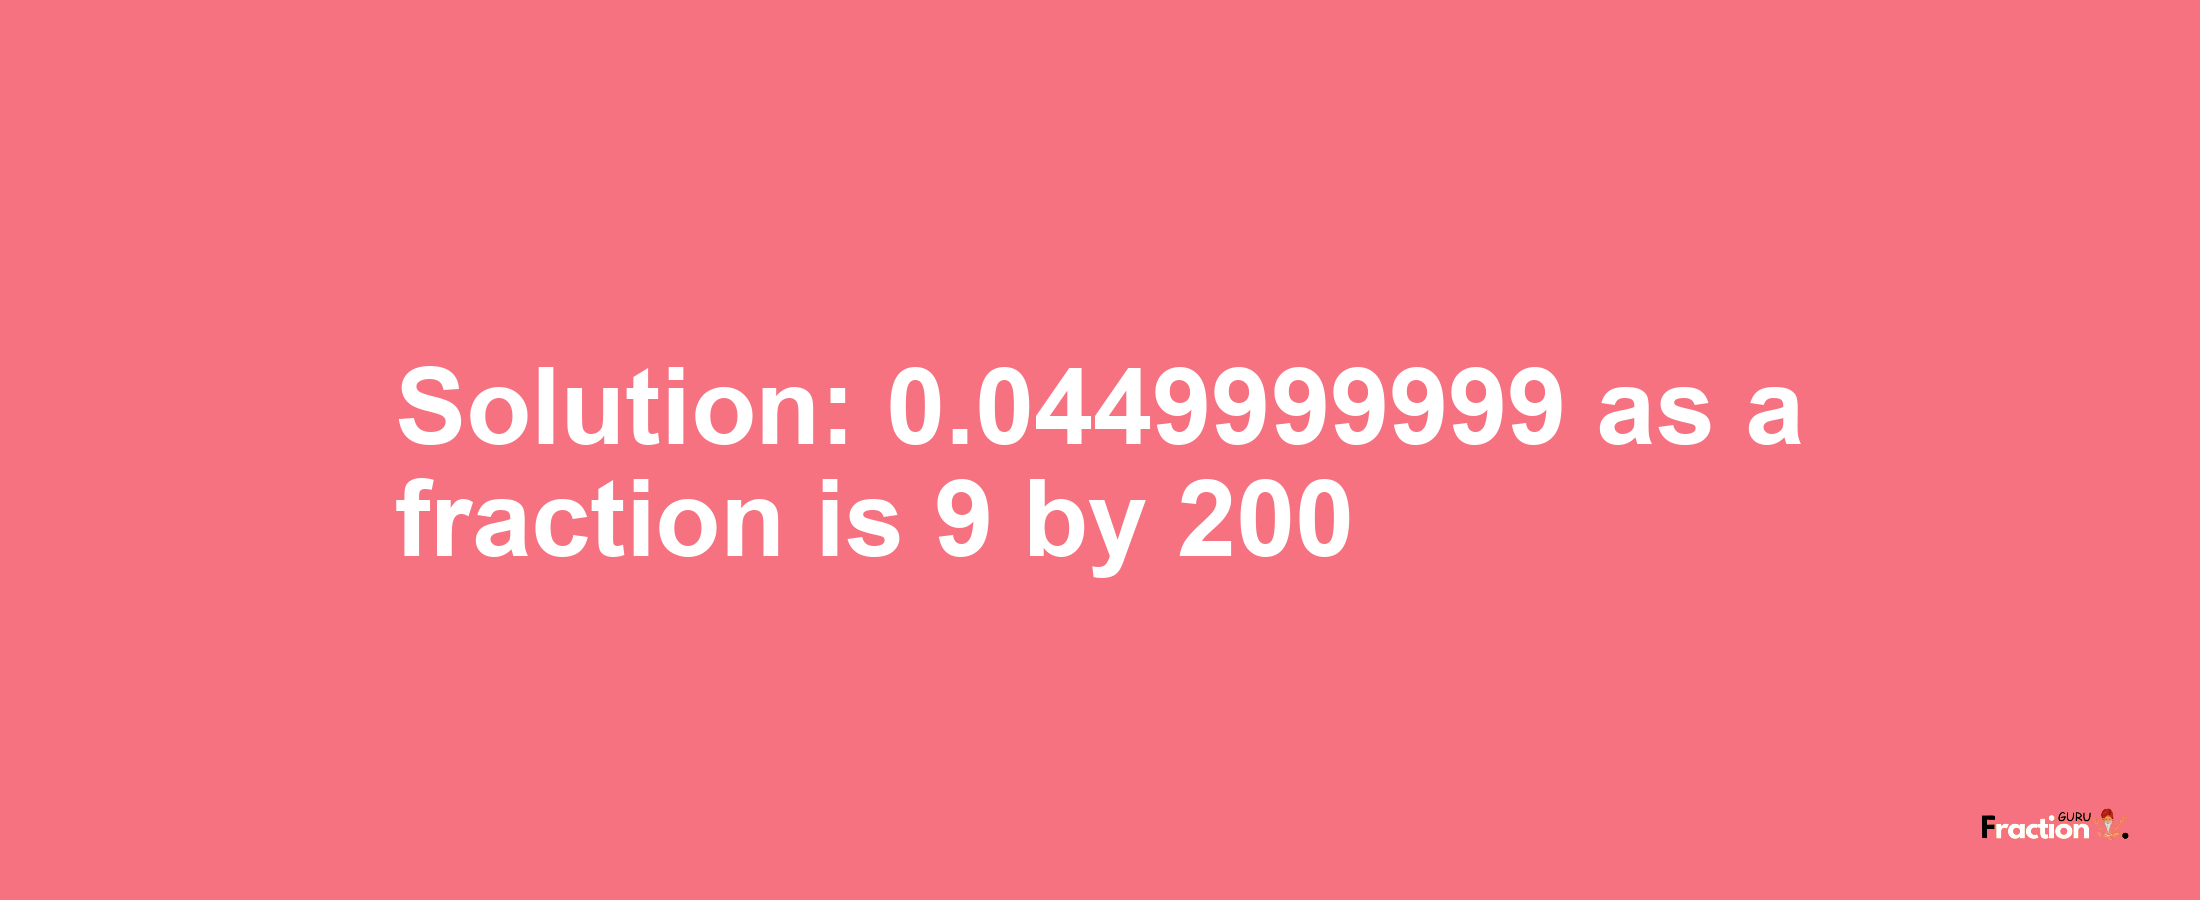 Solution:0.0449999999 as a fraction is 9/200